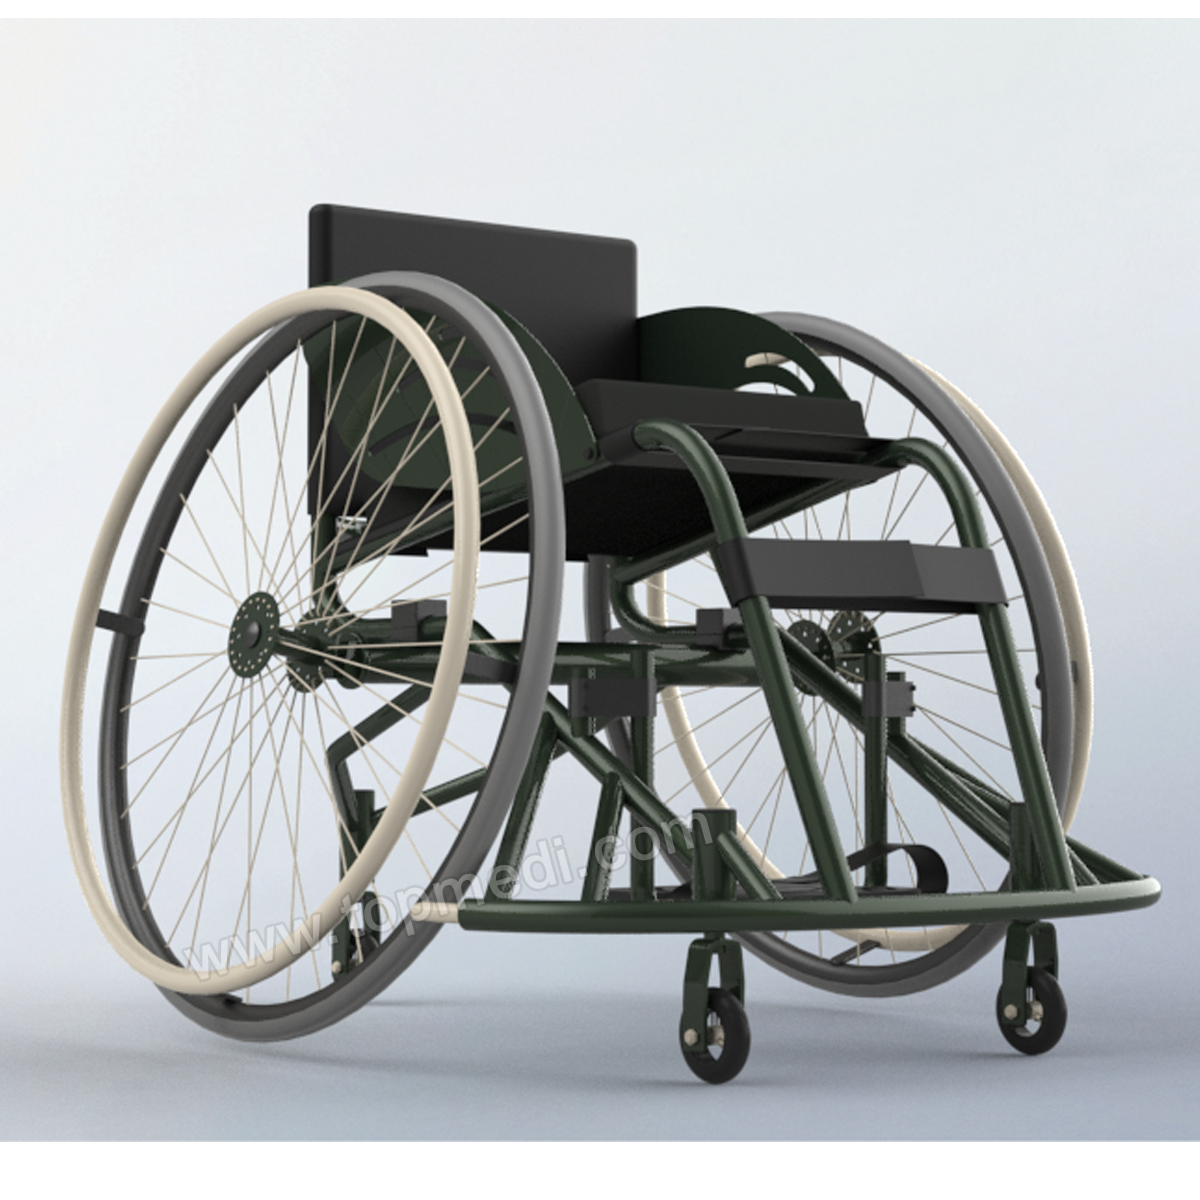 The influence of environment on the purchase of electric wheelchairs